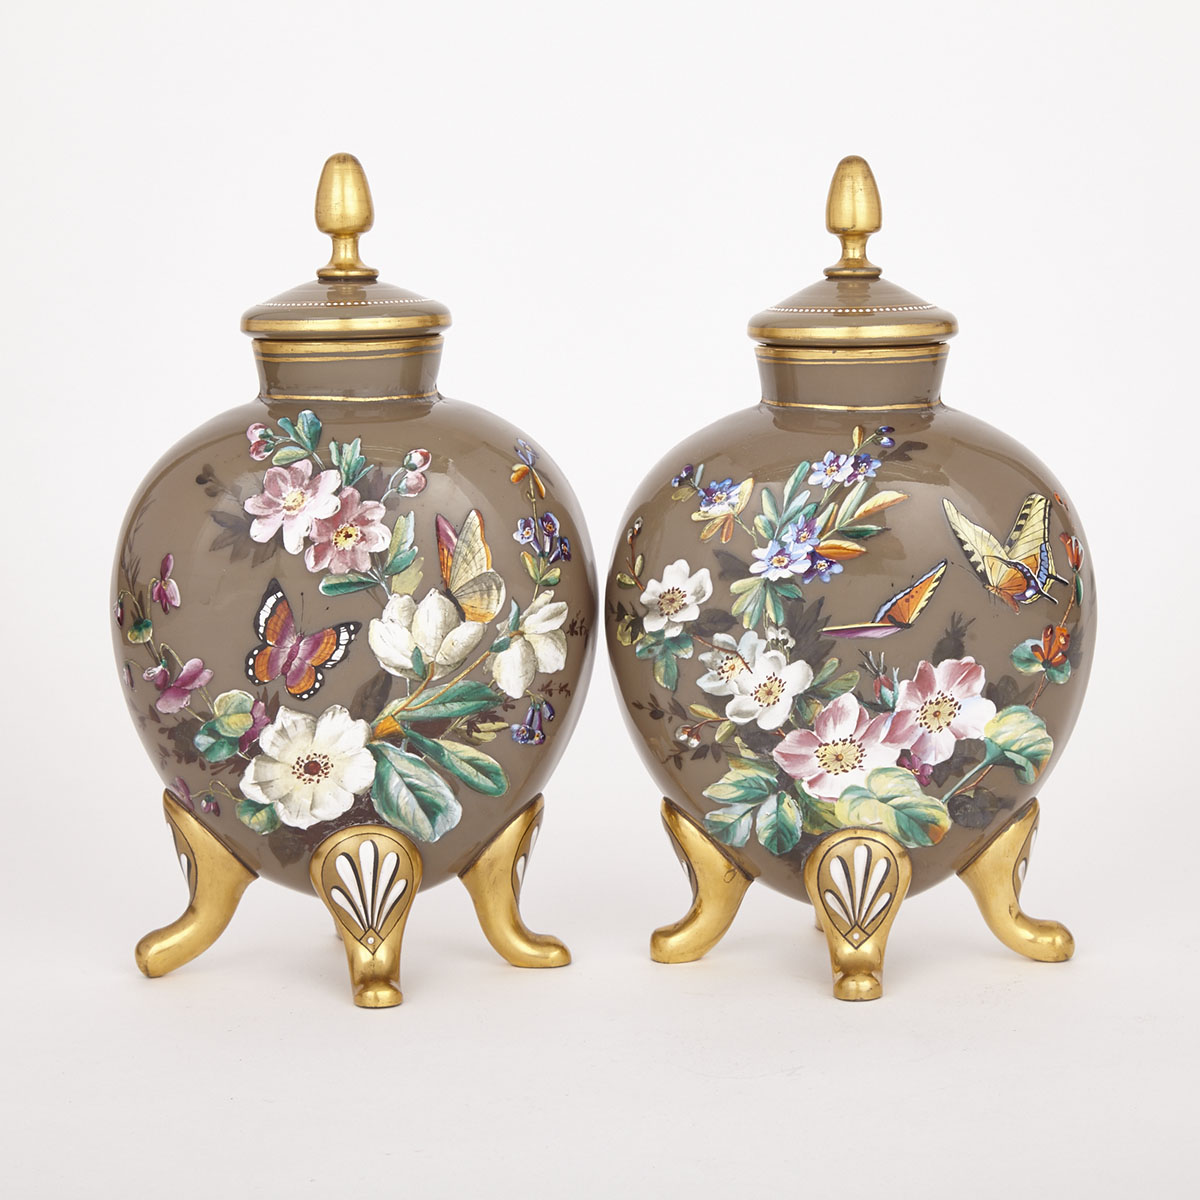 Pair of Continental Enameled and Gilt Brown Opaline Glass Vases and Covers, late 19th century